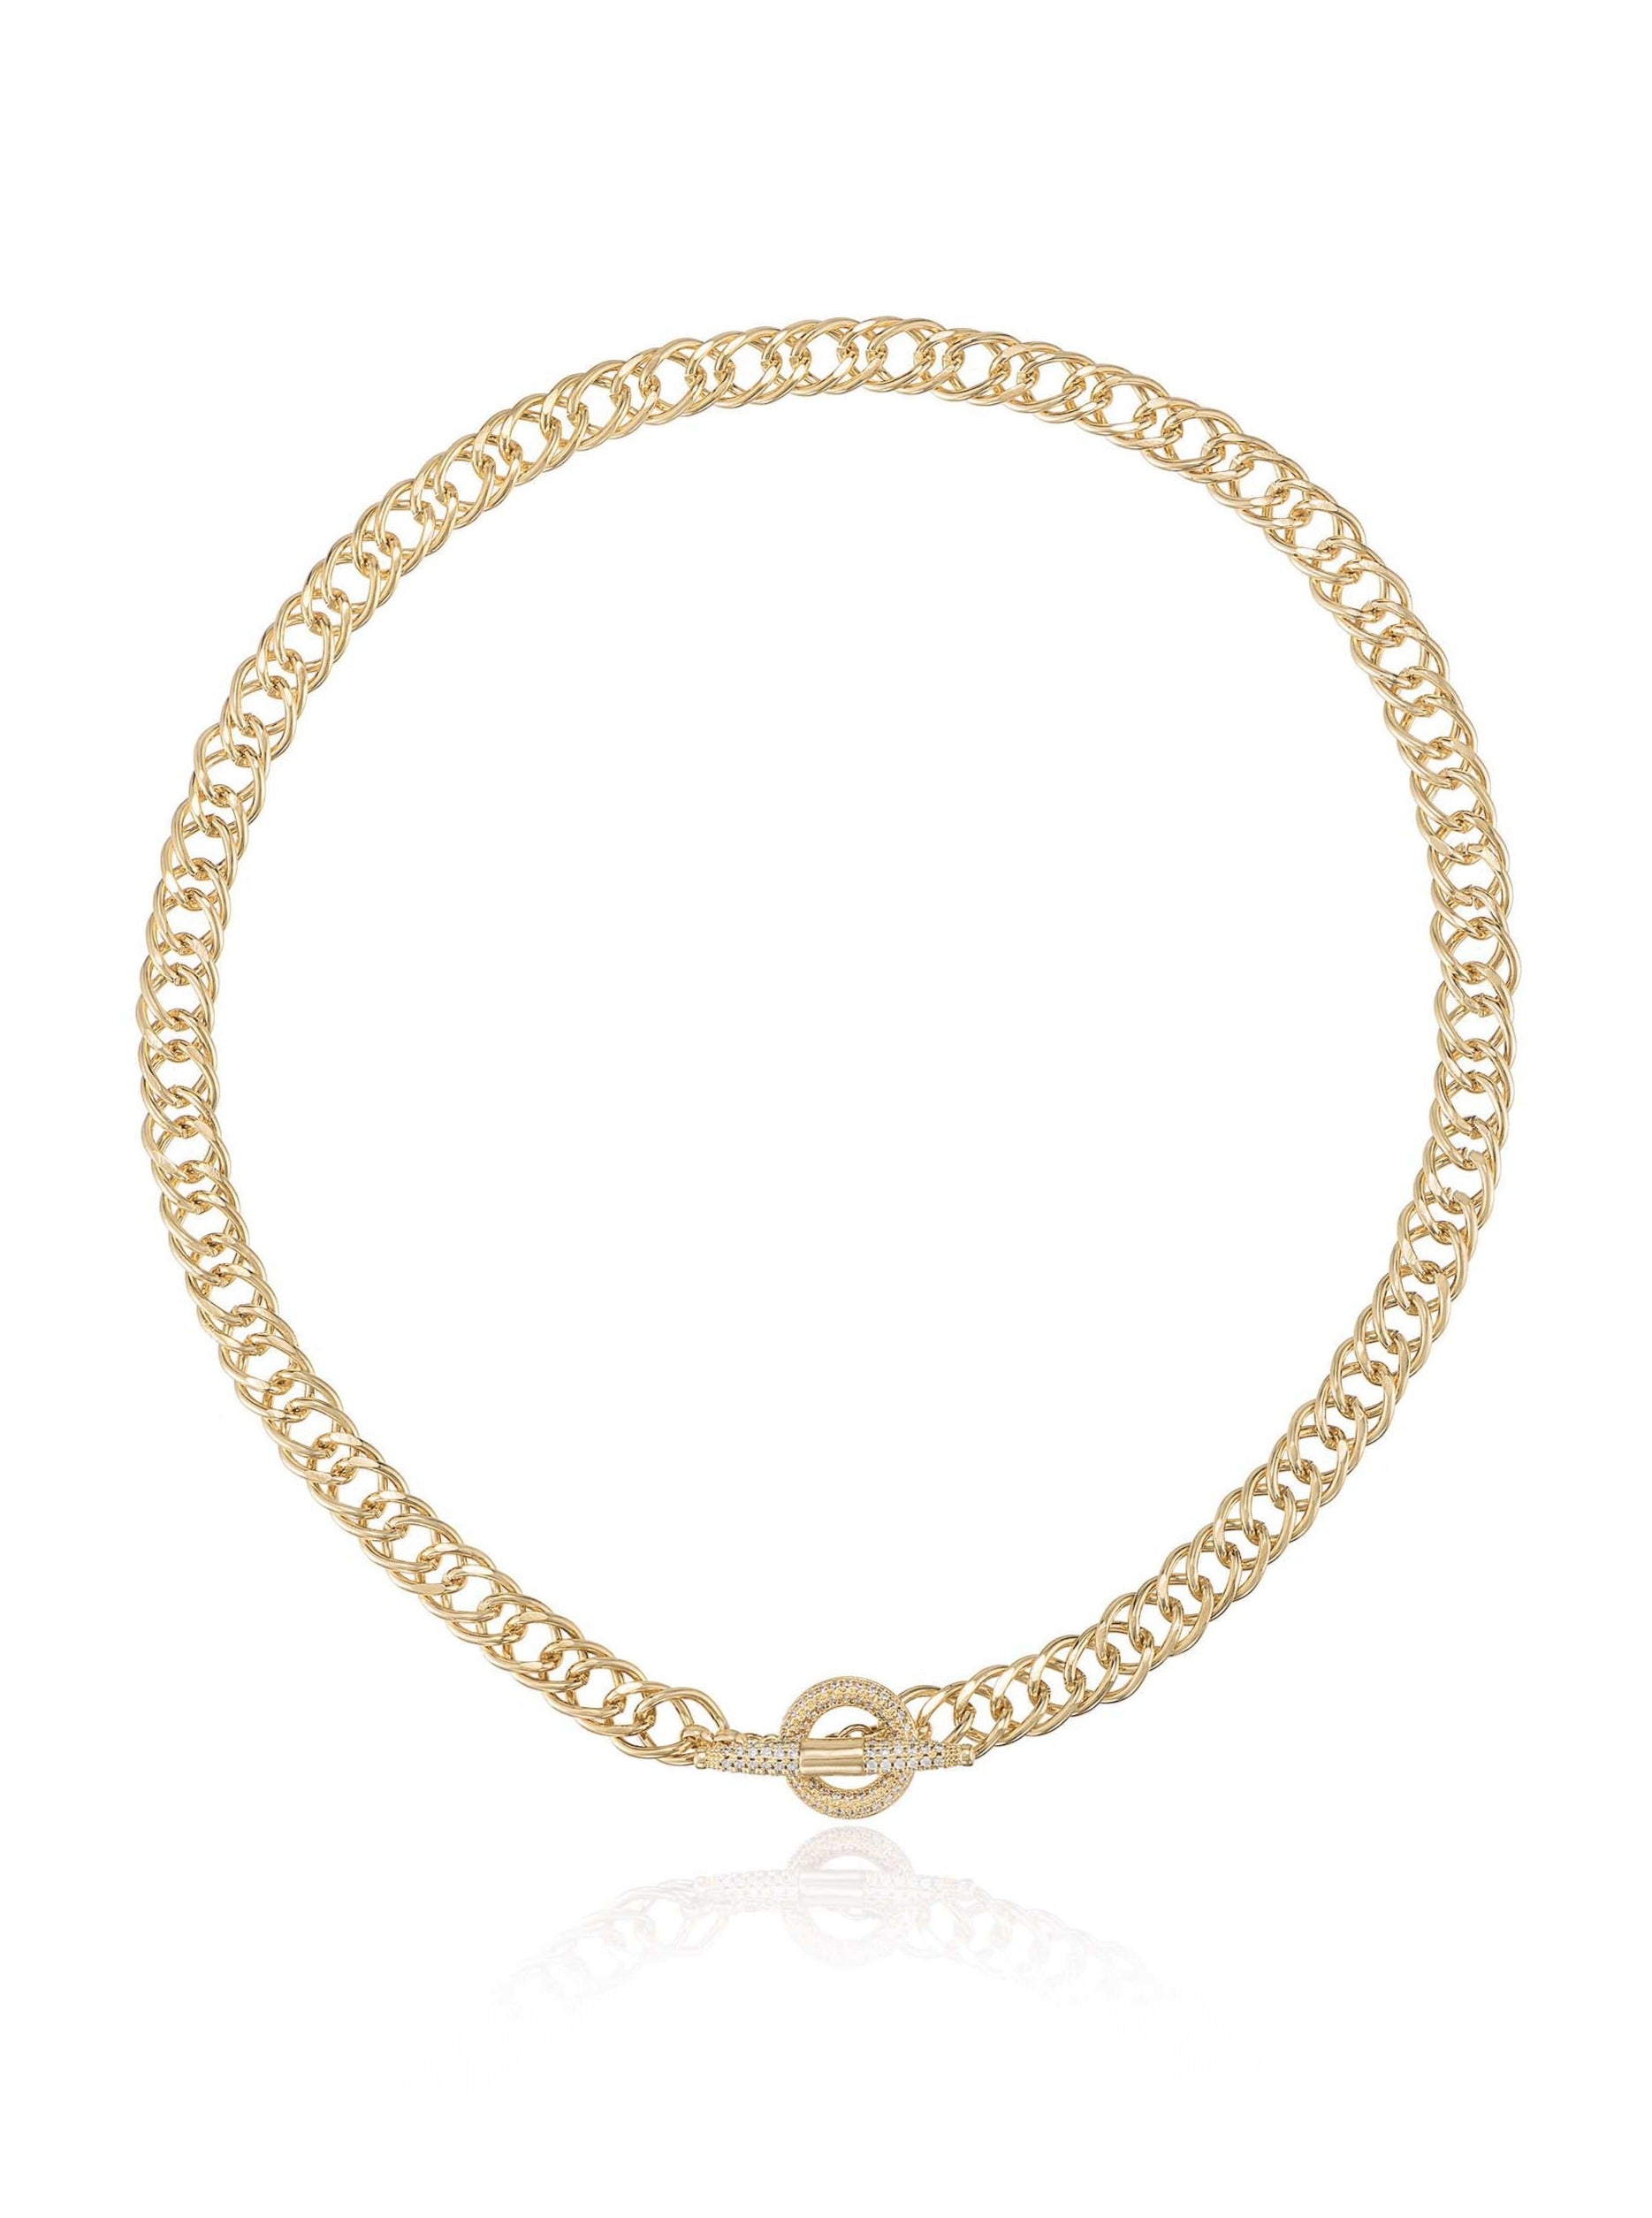 All About That Chain Crystal 18k Gold Plated Necklace